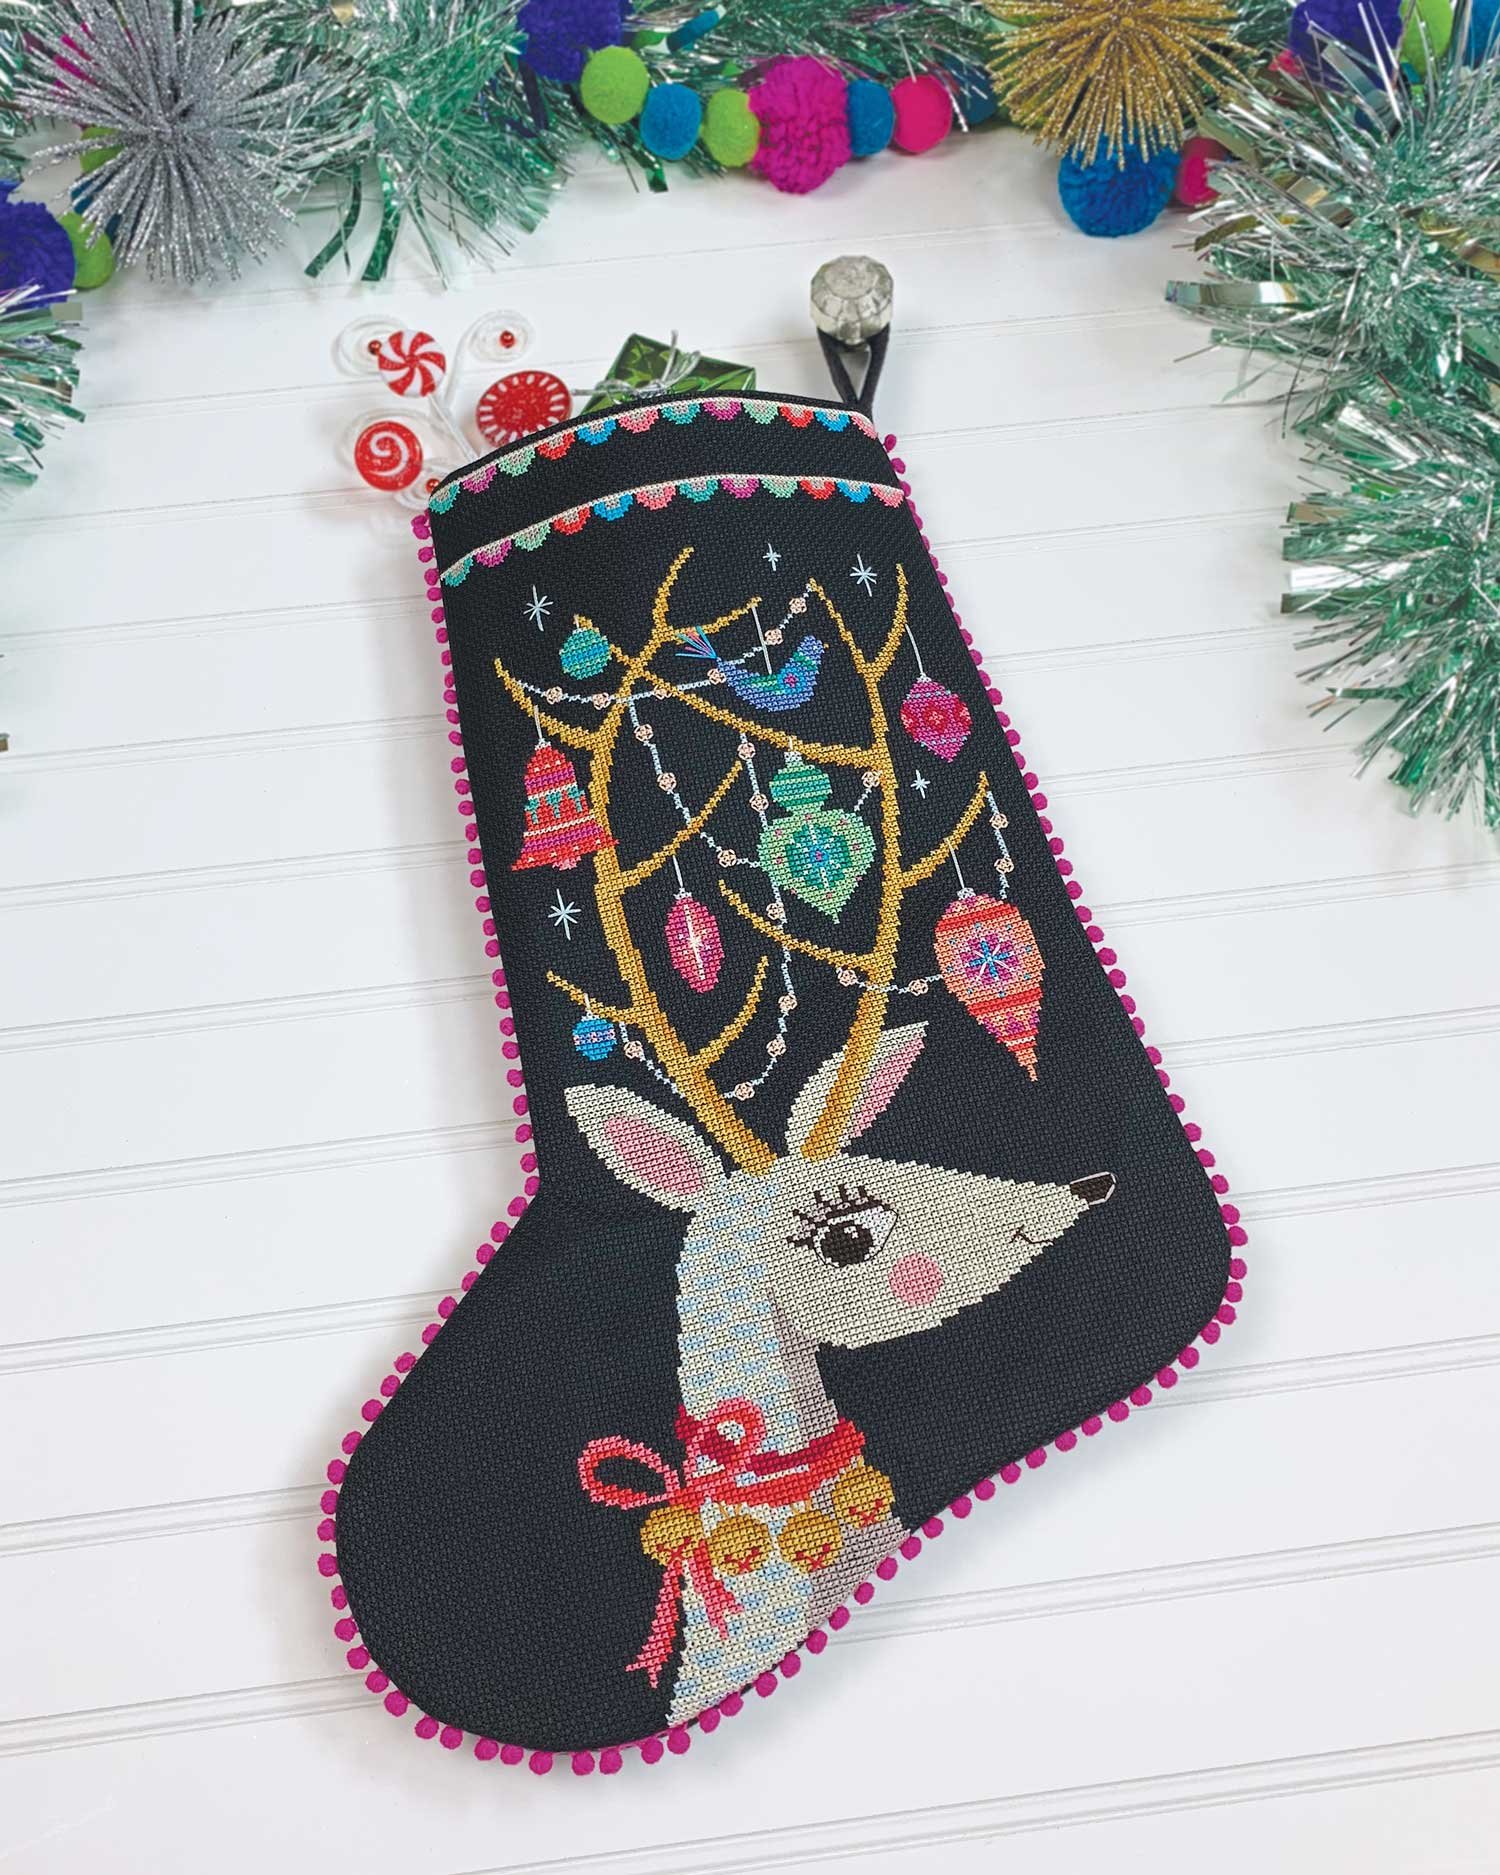 Needlepoint Cross Stitch Christmas Stocking Donner Reindeer Name